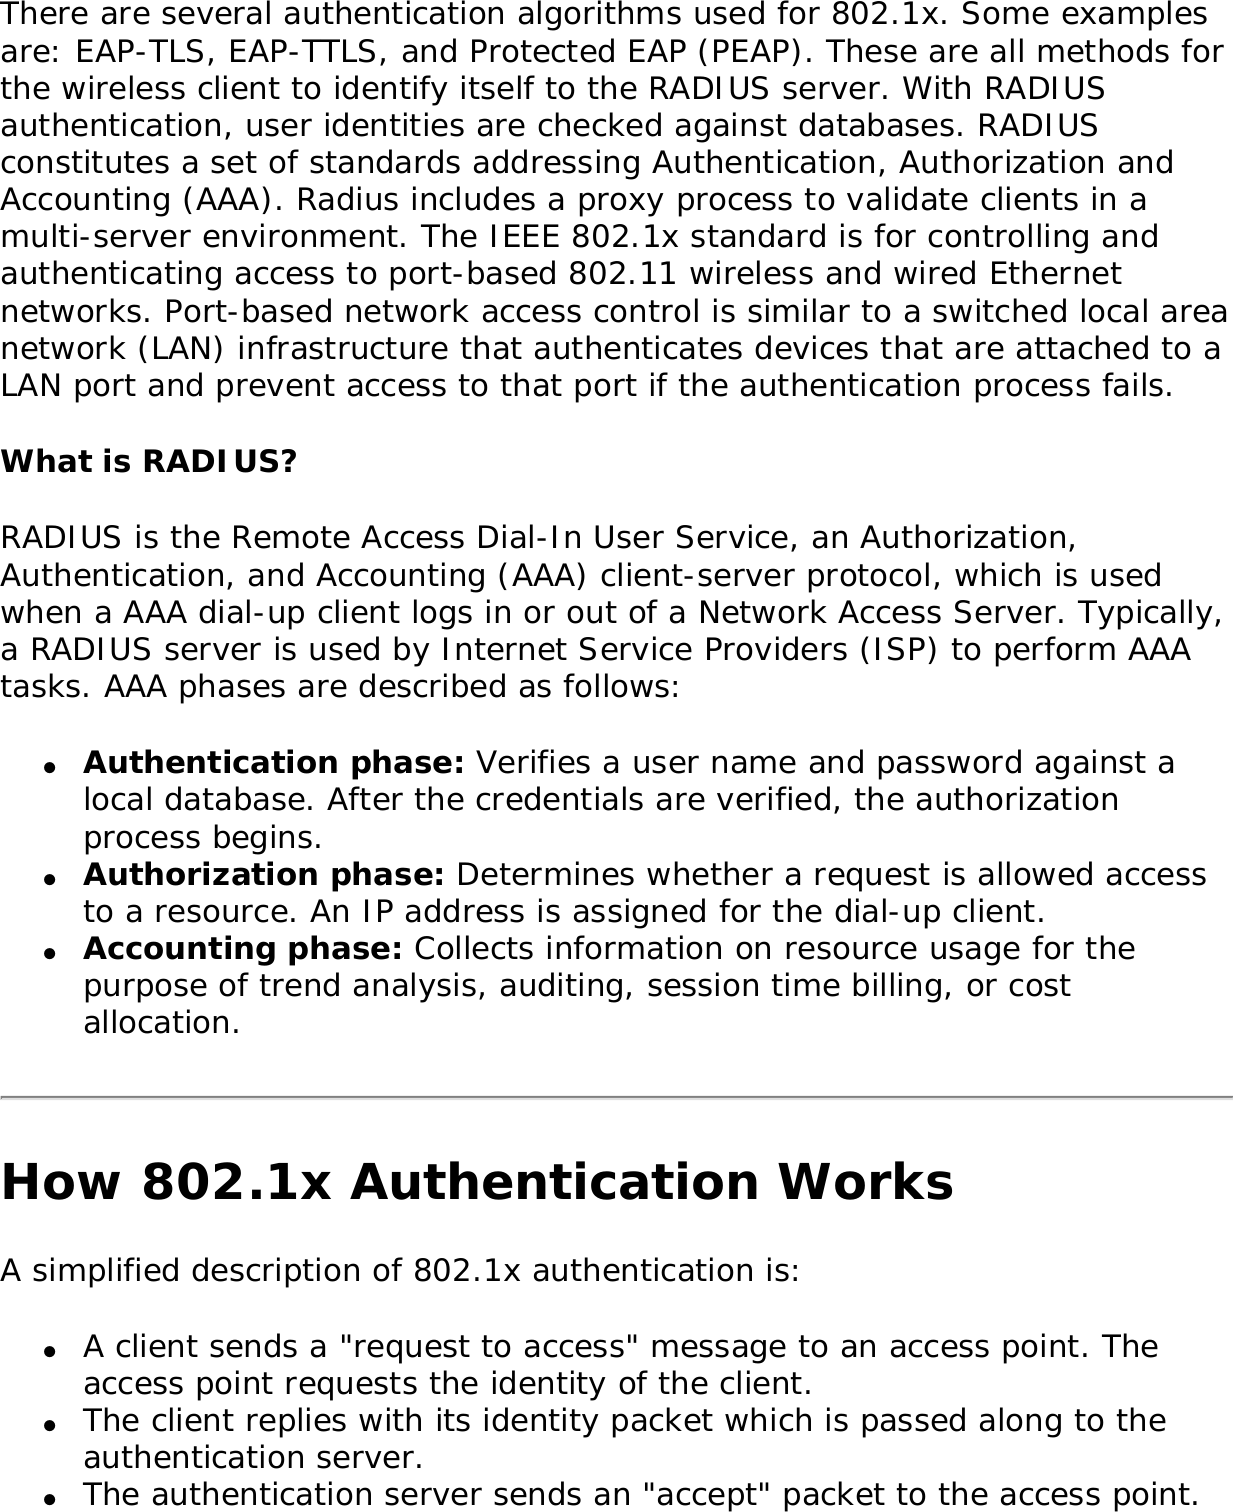 There are several authentication algorithms used for 802.1x. Some examples are: EAP-TLS, EAP-TTLS, and Protected EAP (PEAP). These are all methods for the wireless client to identify itself to the RADIUS server. With RADIUS authentication, user identities are checked against databases. RADIUS constitutes a set of standards addressing Authentication, Authorization and Accounting (AAA). Radius includes a proxy process to validate clients in a multi-server environment. The IEEE 802.1x standard is for controlling and authenticating access to port-based 802.11 wireless and wired Ethernet networks. Port-based network access control is similar to a switched local area network (LAN) infrastructure that authenticates devices that are attached to a LAN port and prevent access to that port if the authentication process fails. What is RADIUS?RADIUS is the Remote Access Dial-In User Service, an Authorization, Authentication, and Accounting (AAA) client-server protocol, which is used when a AAA dial-up client logs in or out of a Network Access Server. Typically, a RADIUS server is used by Internet Service Providers (ISP) to perform AAA tasks. AAA phases are described as follows: ●     Authentication phase: Verifies a user name and password against a local database. After the credentials are verified, the authorization process begins. ●     Authorization phase: Determines whether a request is allowed access to a resource. An IP address is assigned for the dial-up client. ●     Accounting phase: Collects information on resource usage for the purpose of trend analysis, auditing, session time billing, or cost allocation. How 802.1x Authentication WorksA simplified description of 802.1x authentication is: ●     A client sends a &quot;request to access&quot; message to an access point. The access point requests the identity of the client. ●     The client replies with its identity packet which is passed along to the authentication server. ●     The authentication server sends an &quot;accept&quot; packet to the access point. 